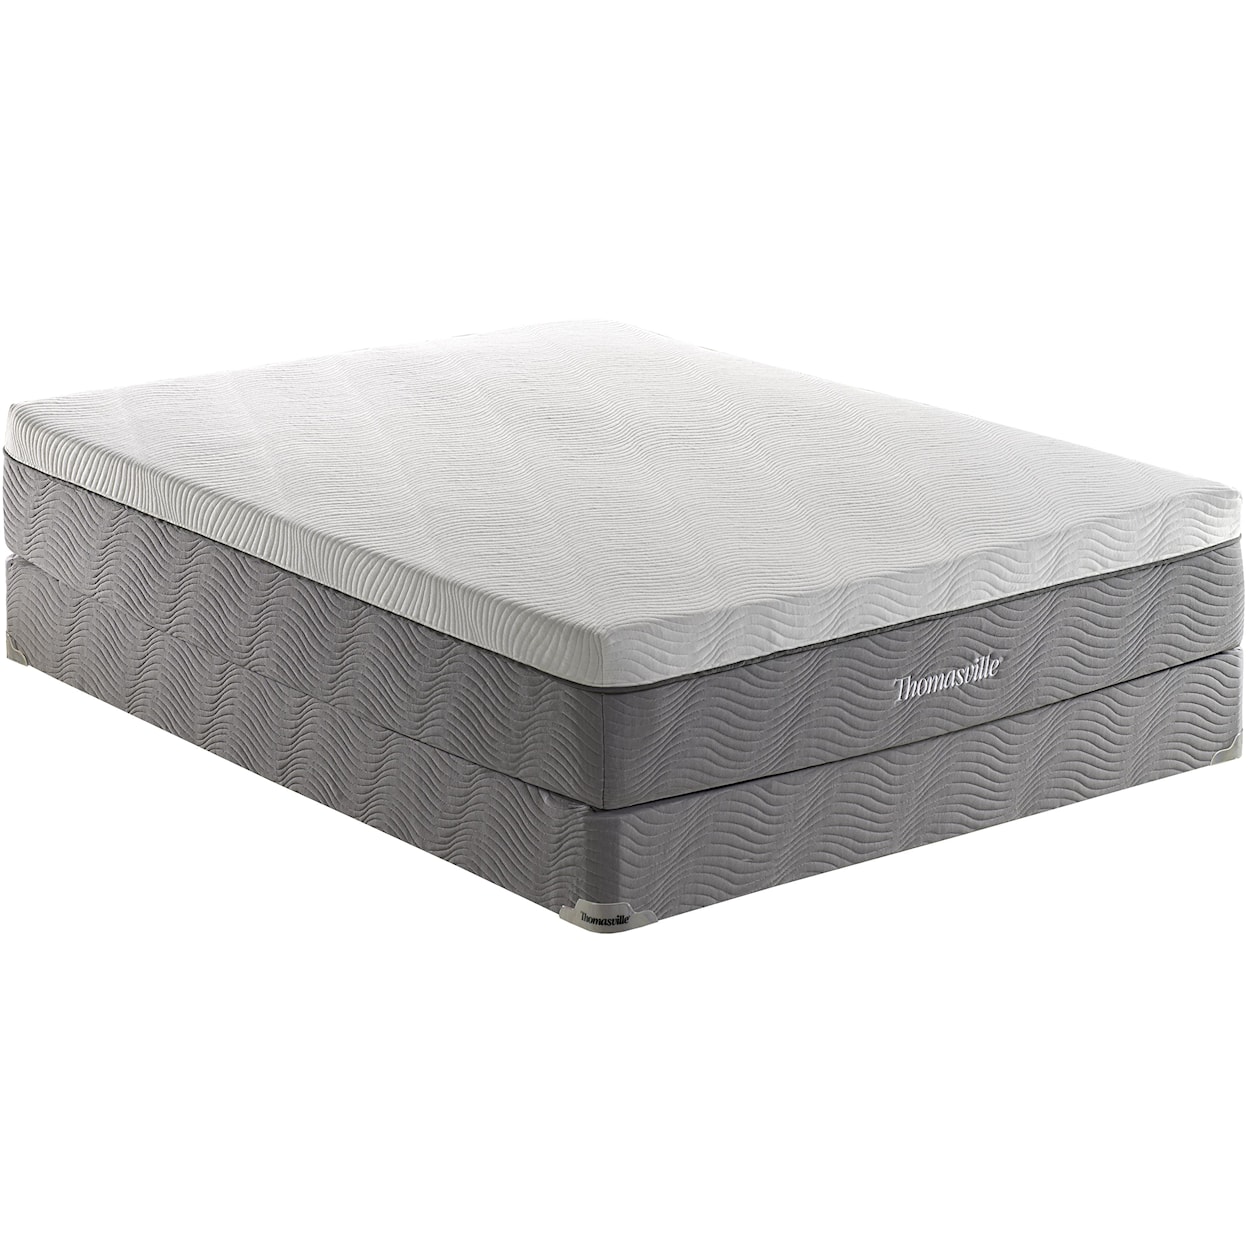 Boyd Specialty Sleep Celestial King Adjstable Dual Zone Airbed Mattress Set